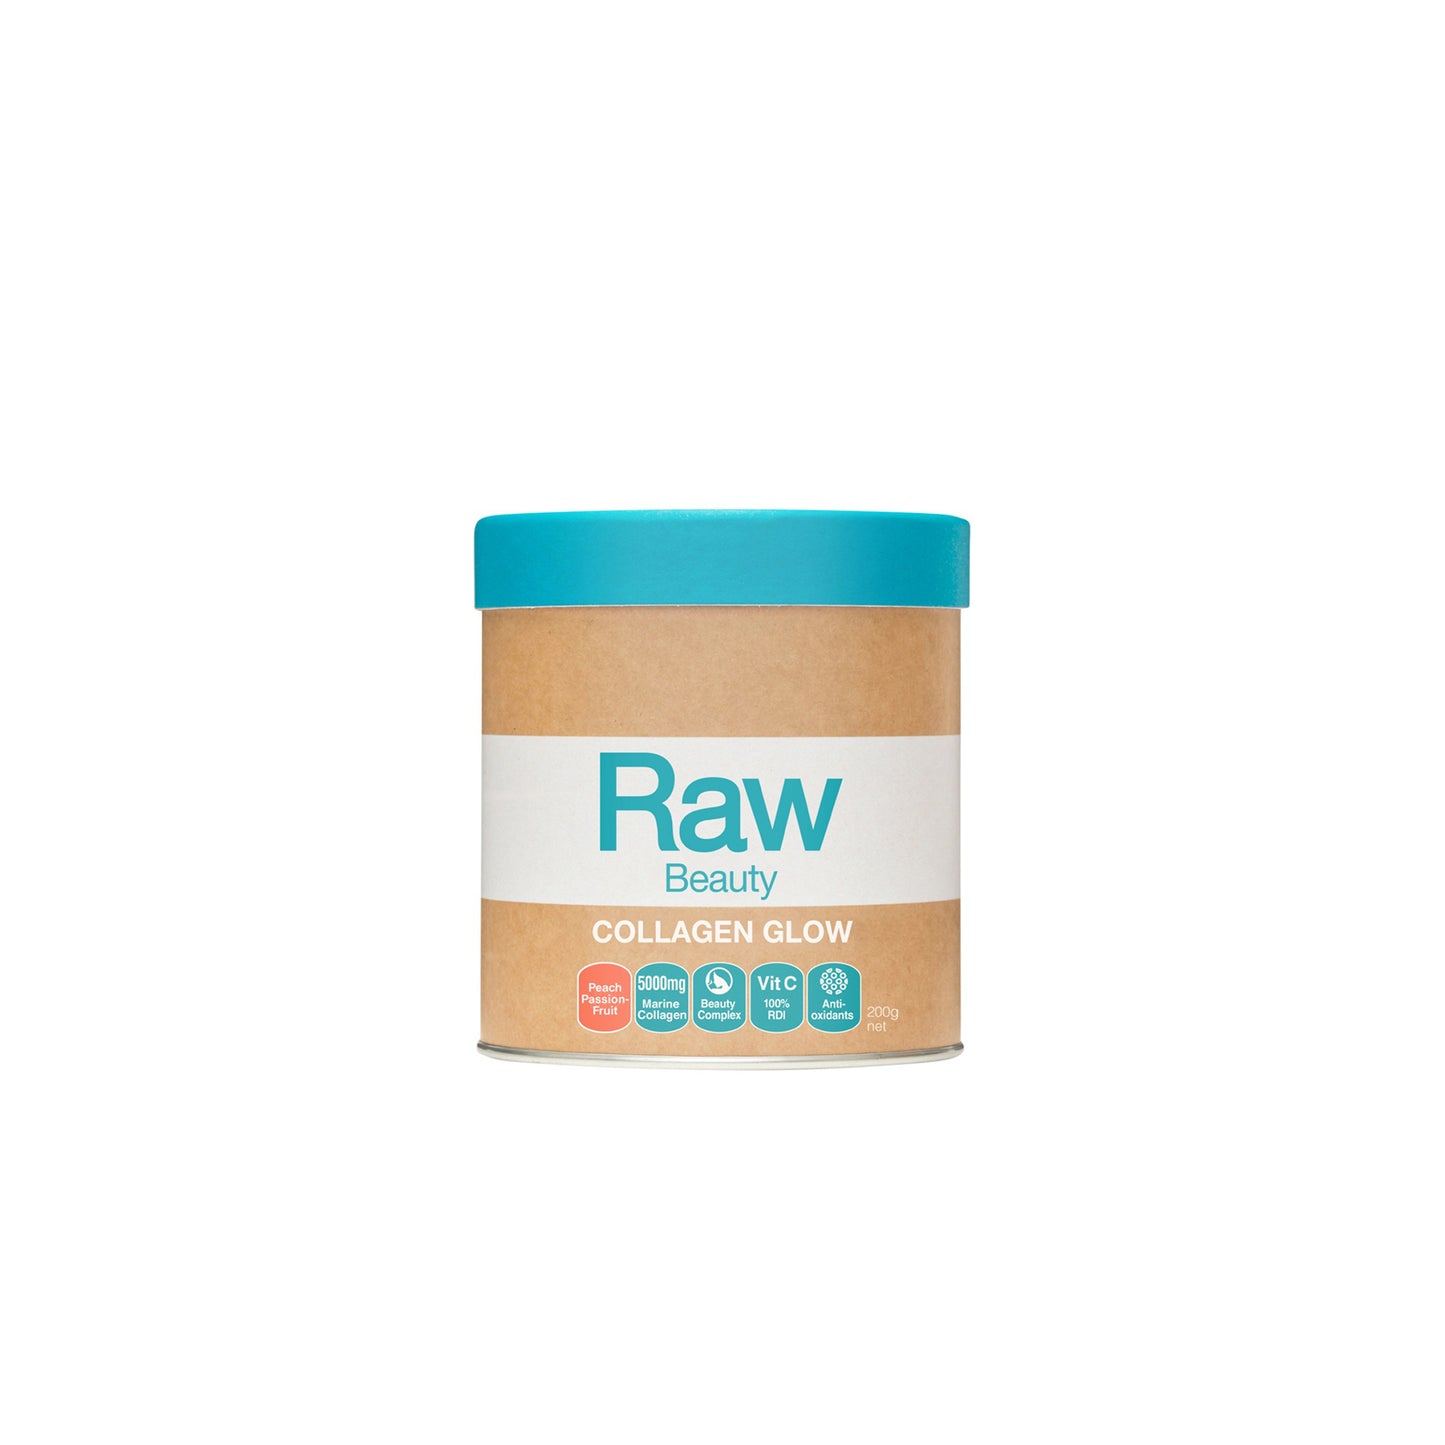 Raw Beauty Collagen Glow - Peach Passionfruit 200g - Amazonia | MLC Space